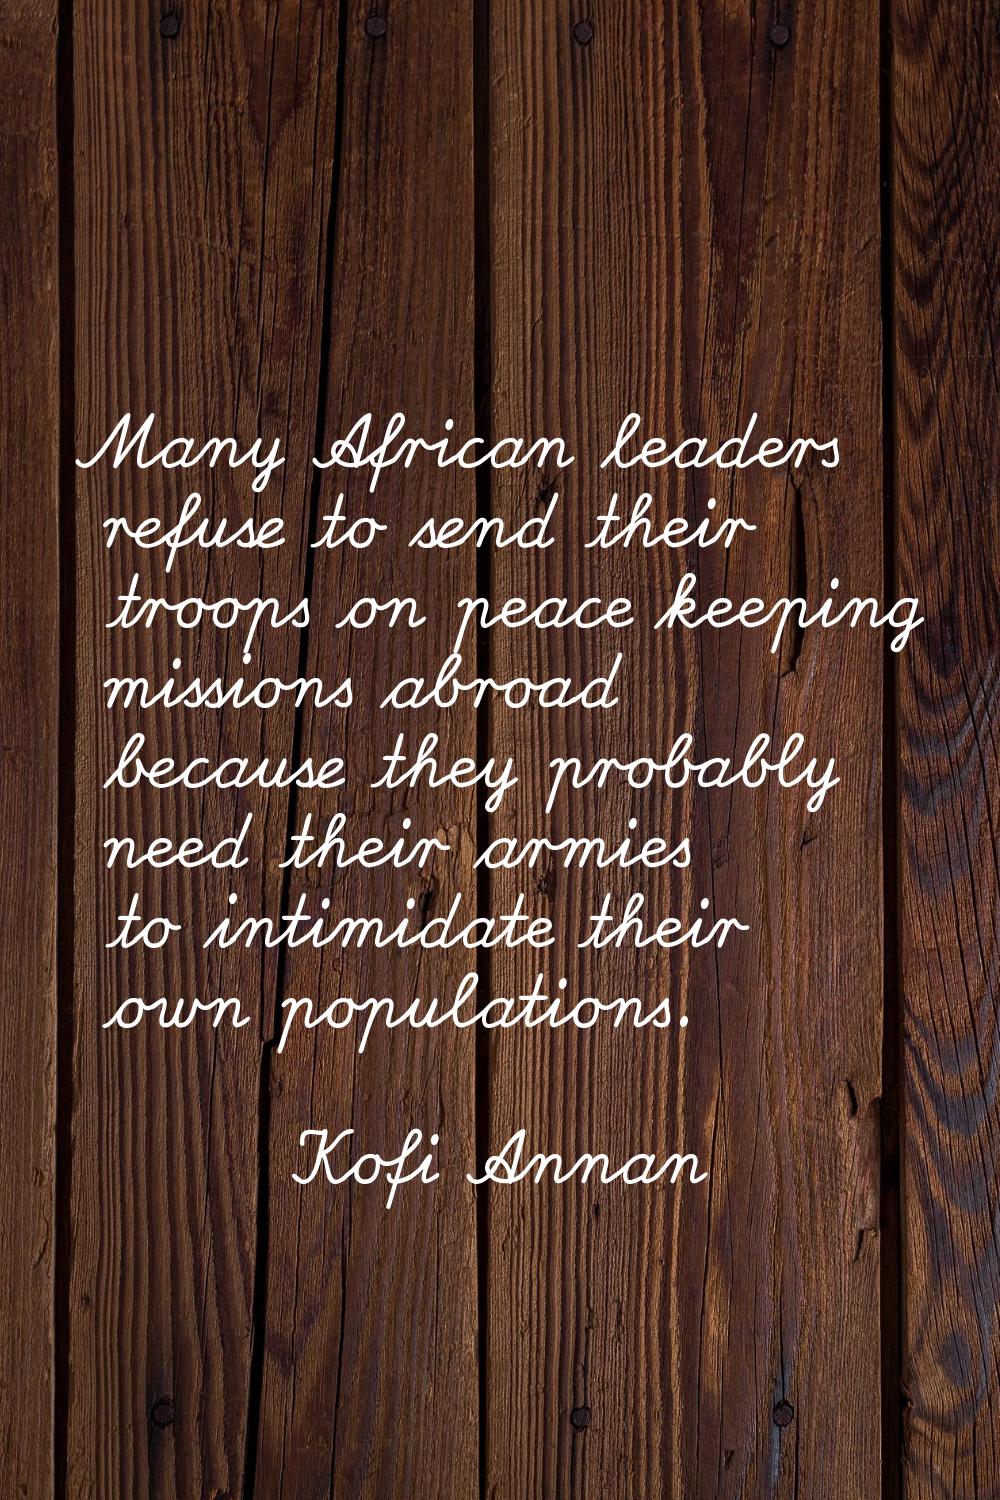 Many African leaders refuse to send their troops on peace keeping missions abroad because they prob